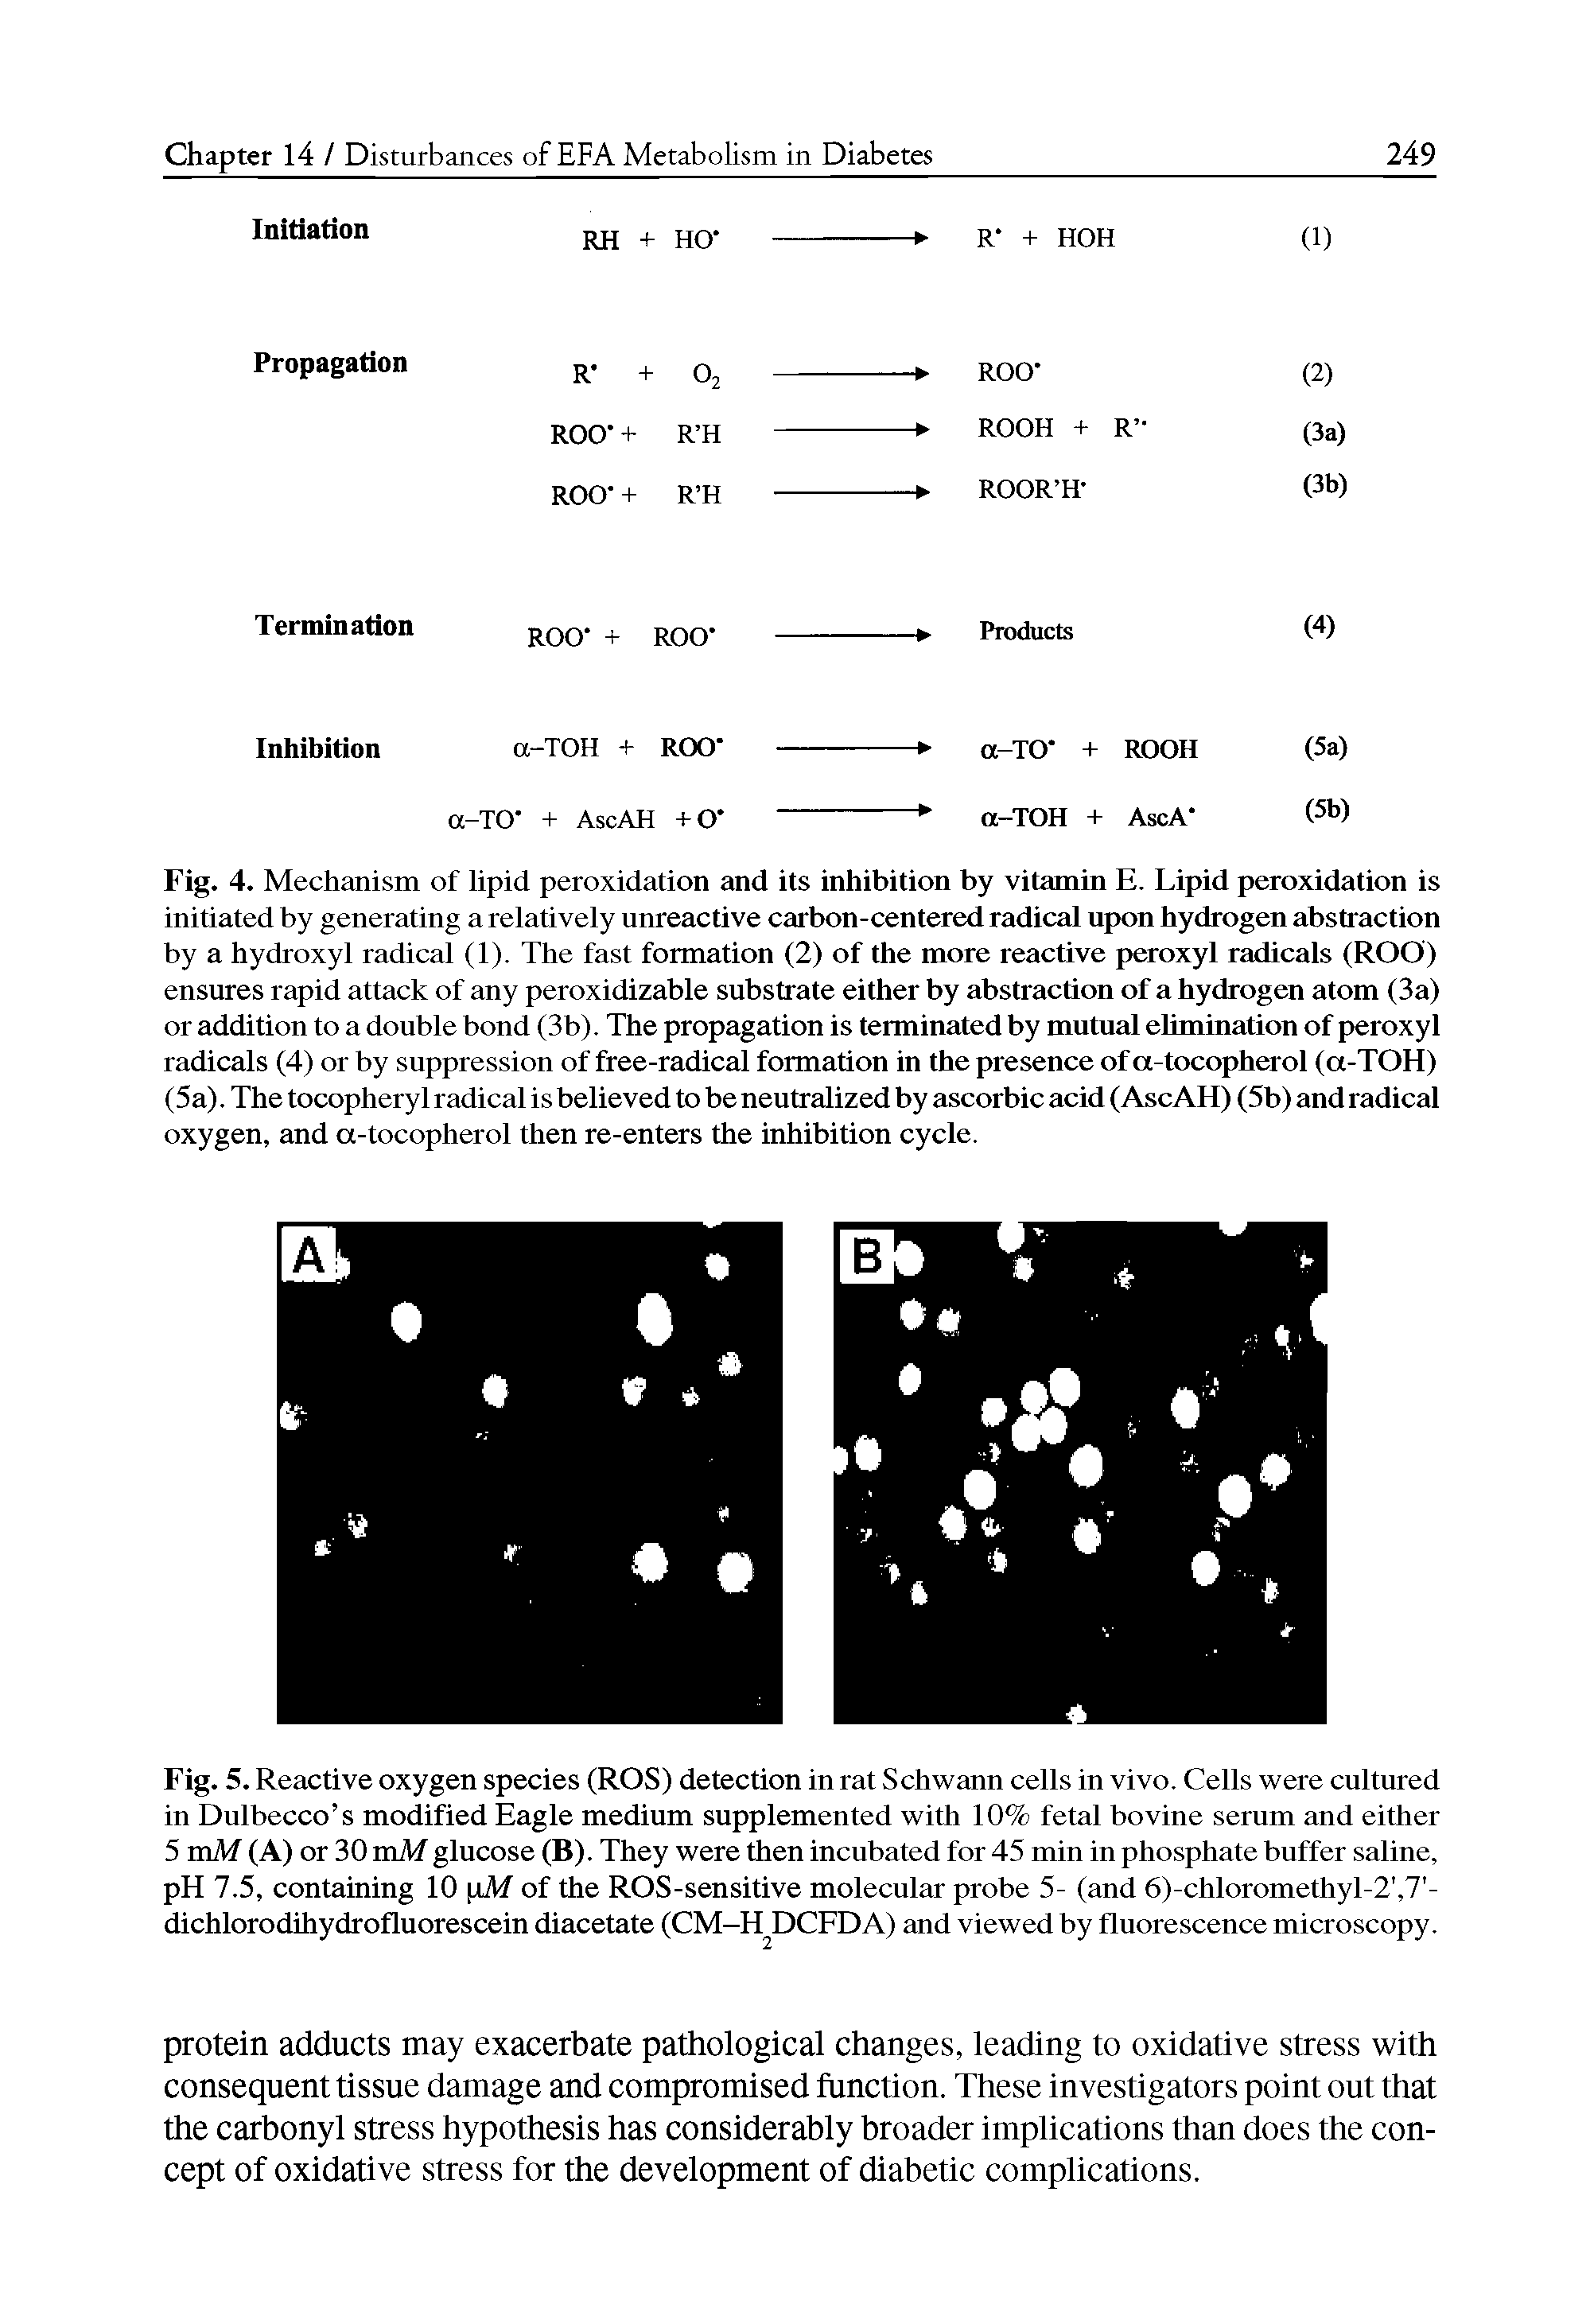 Fig. 5. Reactive oxygen species (ROS) detection in rat Schwann cells in vivo. Cells were cultured in Dulbecco s modified Eagle medium supplemented with 10% fetal bovine serum and either 5 vaM (A) or 30 vaM glucose (B). They were then incubated for 45 min in phosphate buffer saline, pH 7.5, containing 10 M of the ROS-sensitive molecular probe 5- (and 6)-chloromethyl-2, 7 -dichlorodihydrofluorescein diacetate (CM-H DCFD A) and viewed by fluorescence microscopy.